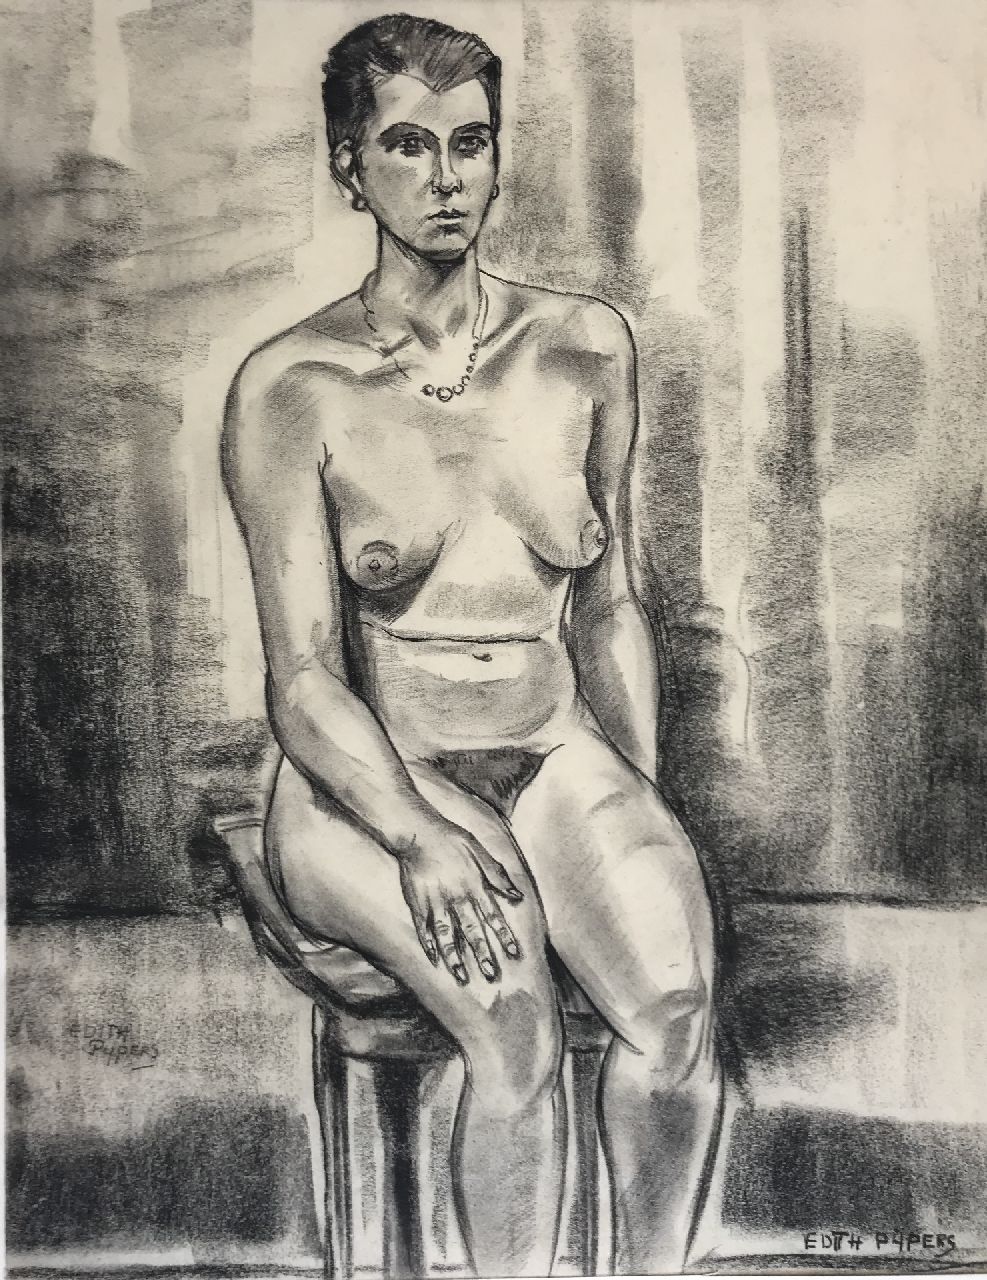 Pijpers E.E.  | 'Edith' Elizabeth Pijpers | Watercolours and drawings offered for sale | seated nude, charcoal on paper 45.0 x 36.5 cm, signed l.l. and l.r.